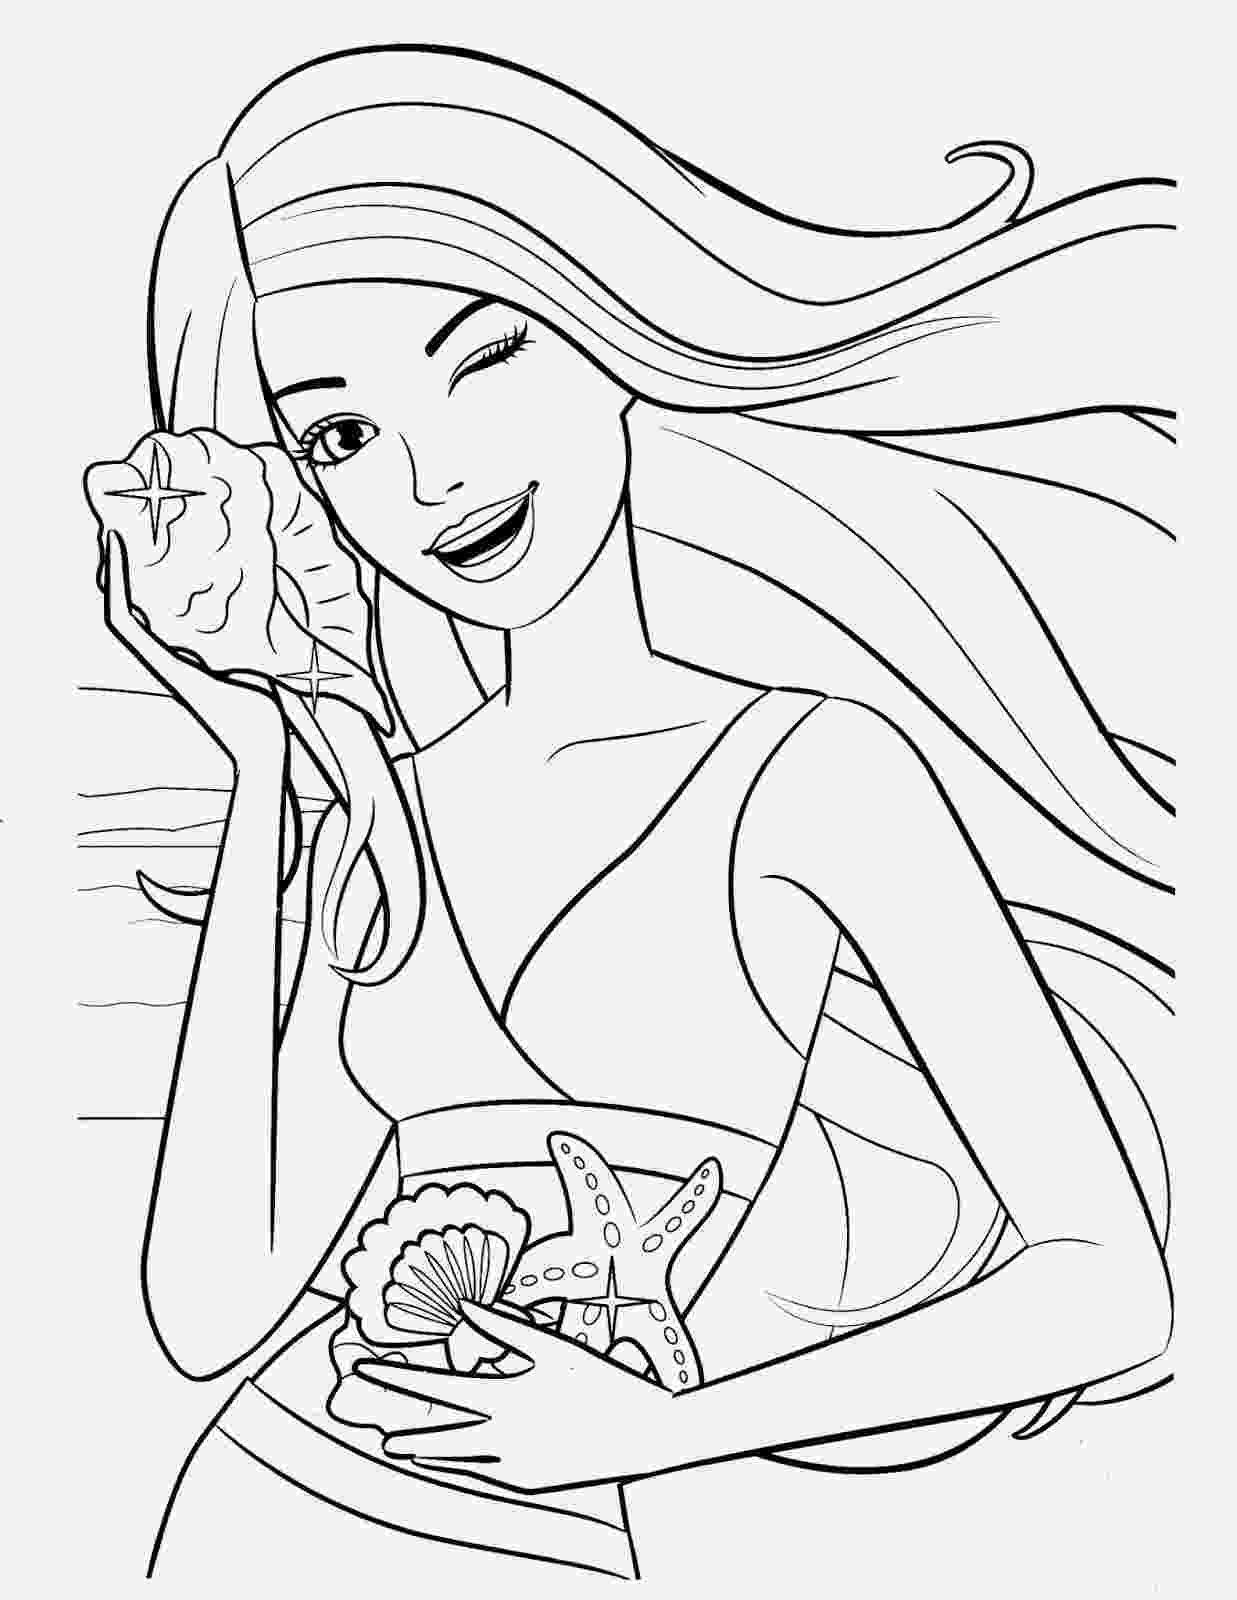 barbie coloring pages for kids top 50 free printable barbie coloring pages online barbie coloring pages for kids 